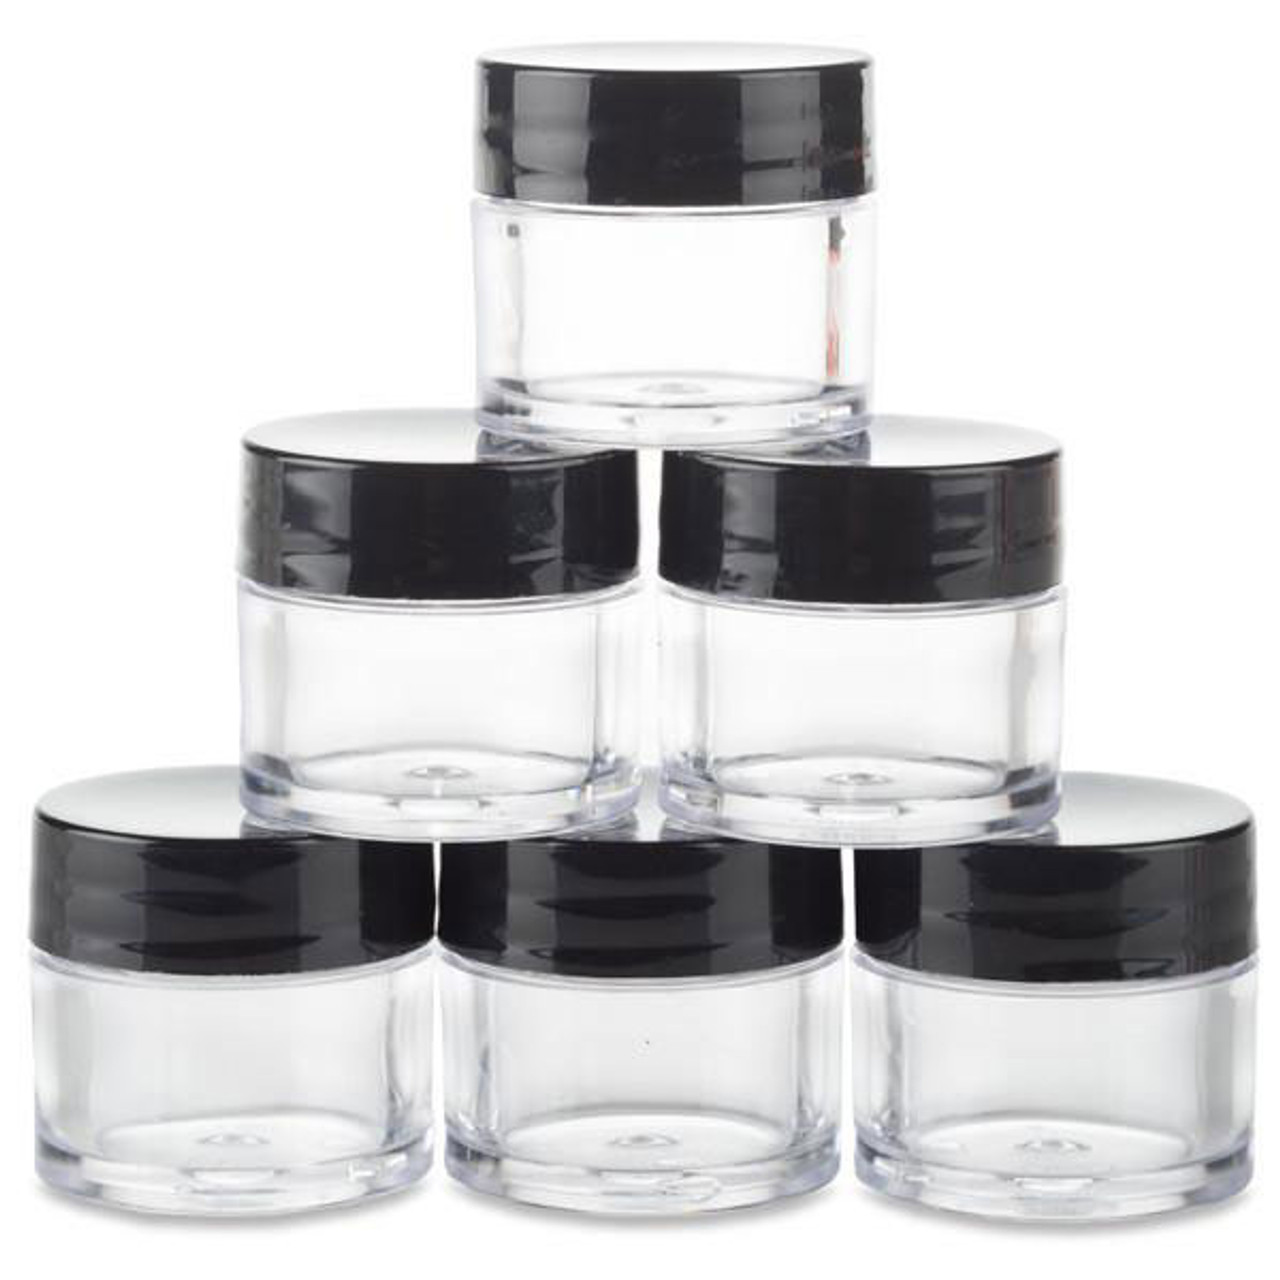 Light Elegance Clear Mixing Containers - 8 ml, 6 count